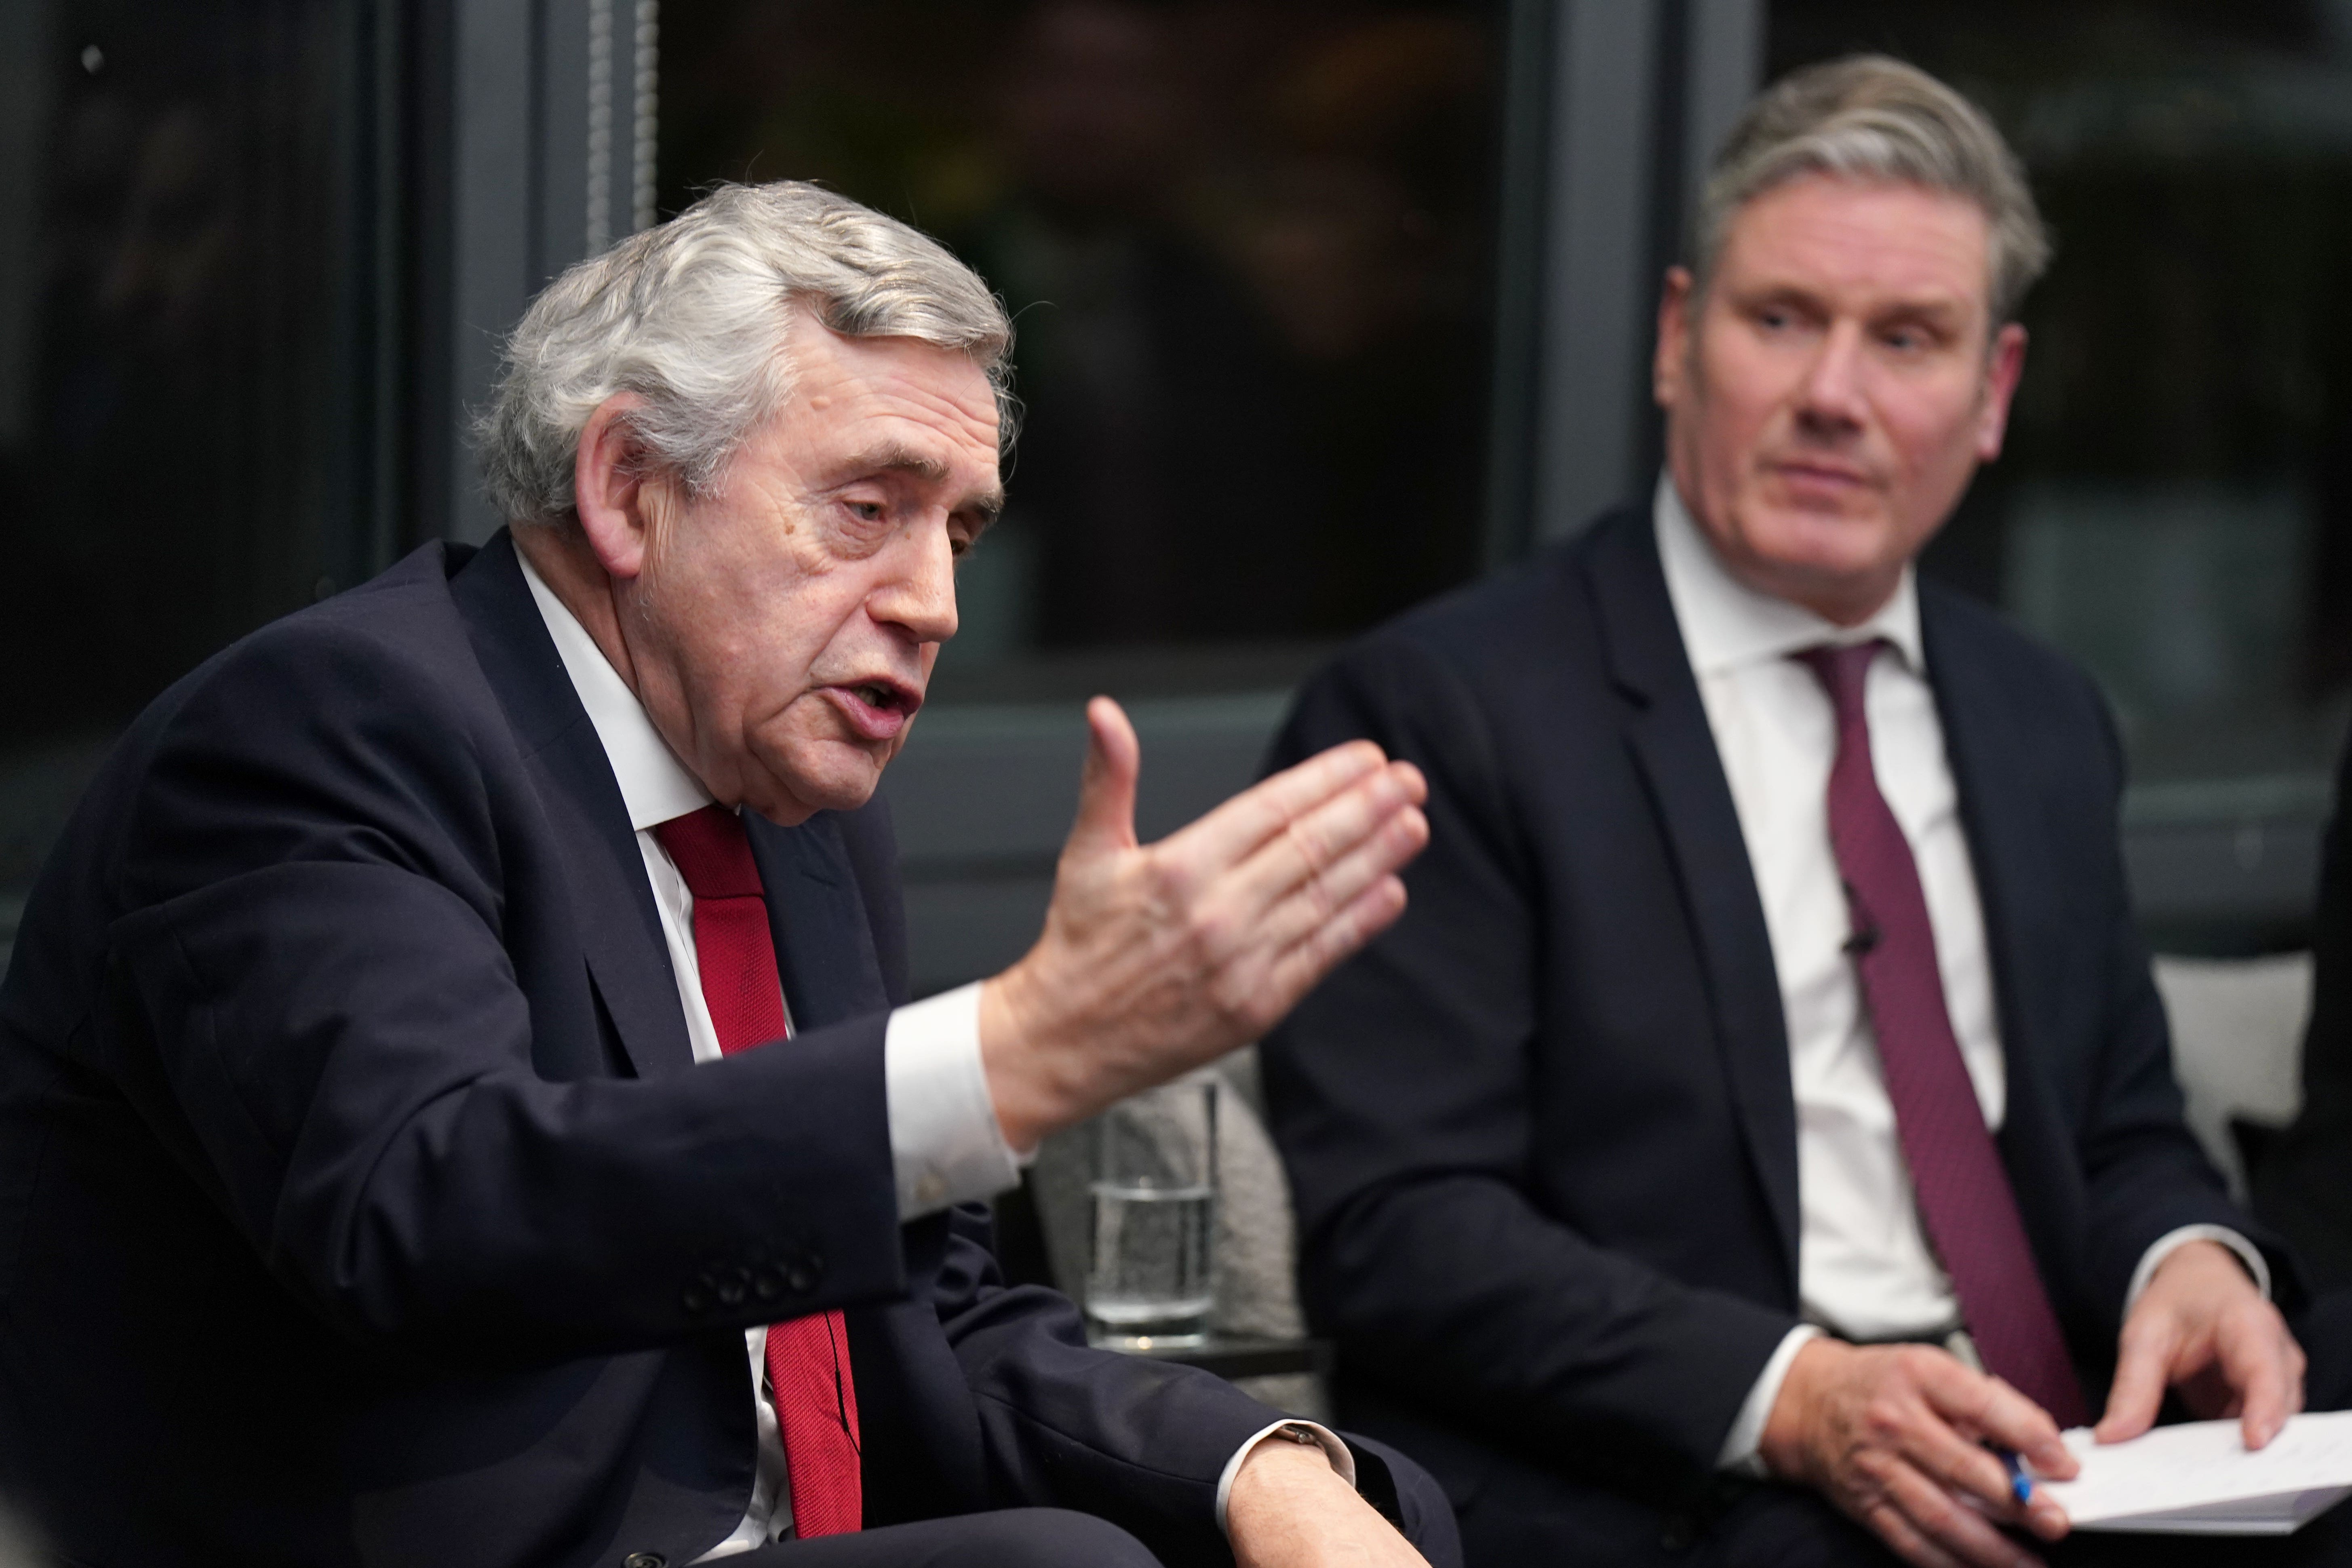 Gordon Brown said the policy is consigning children to poverty